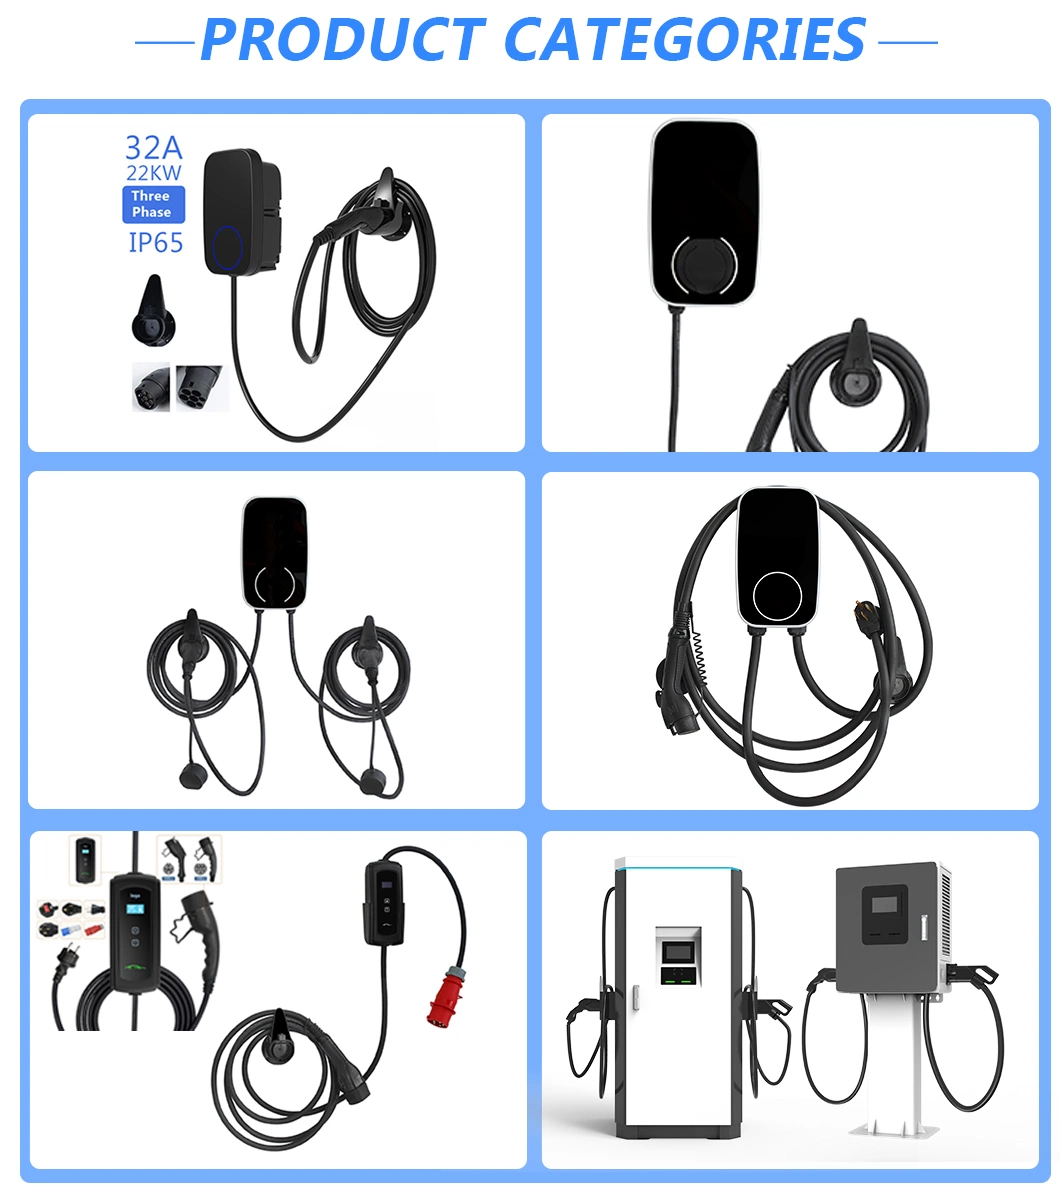 EV Charger Manufacturers CCS Chademo 40kw Electric Vehicle Car DC EV Fast Charging Station